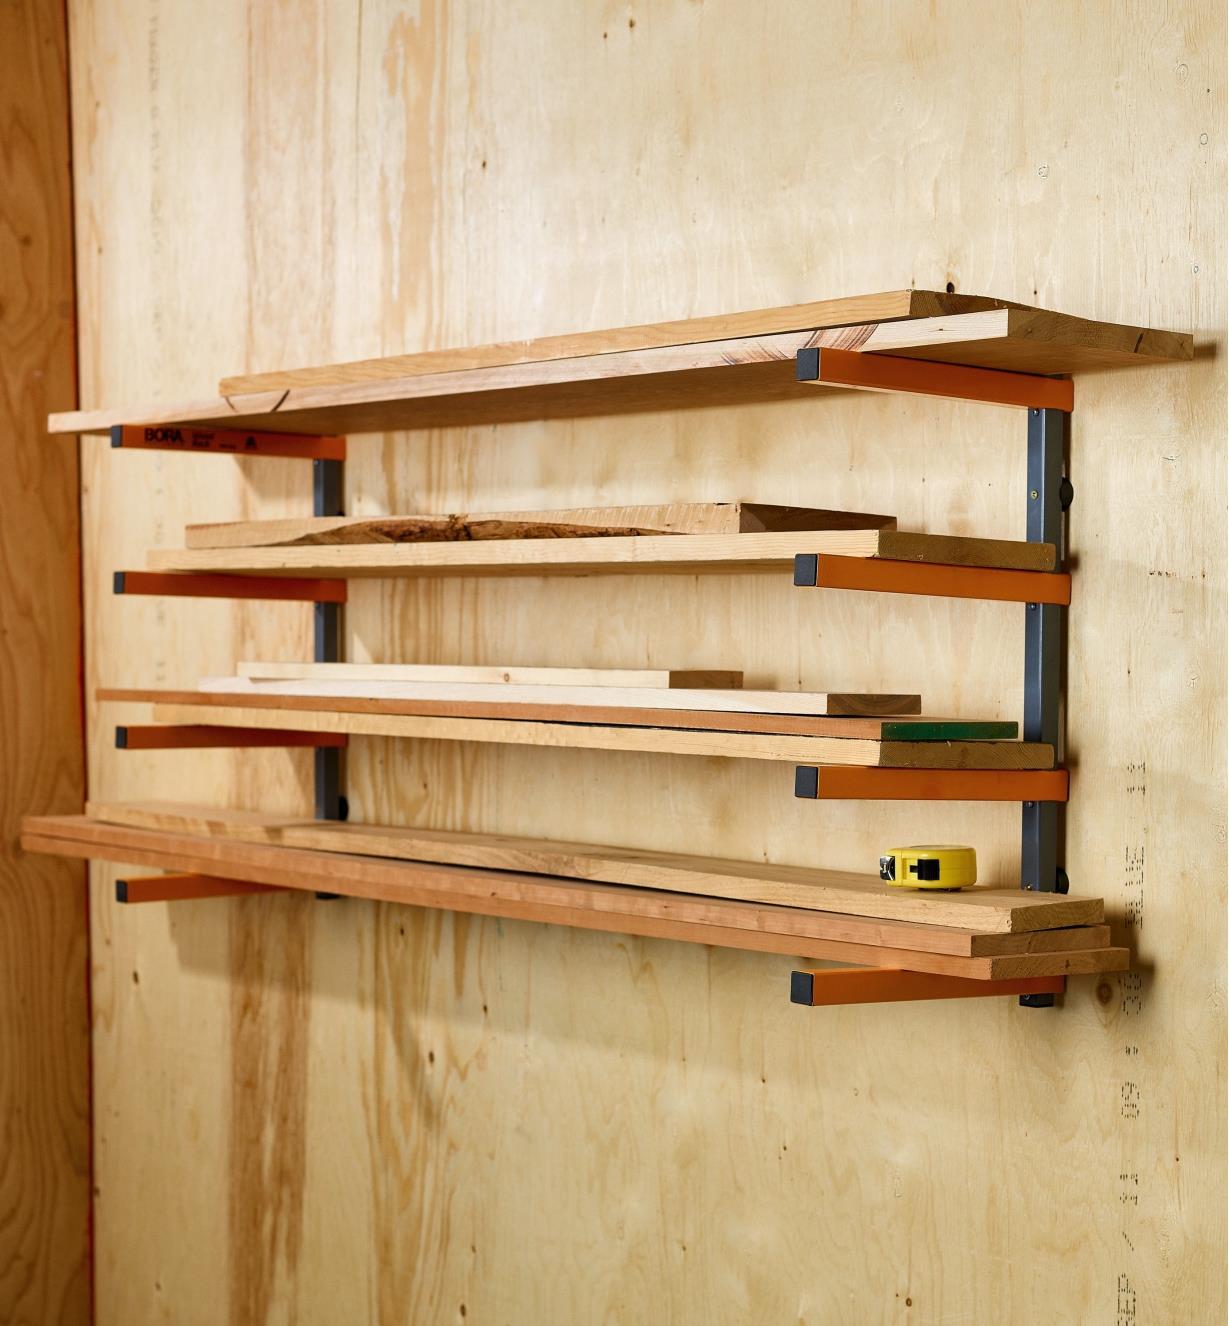 A measuring tape sits on wooden boards stacked on a Bora four-shelf lumber rack